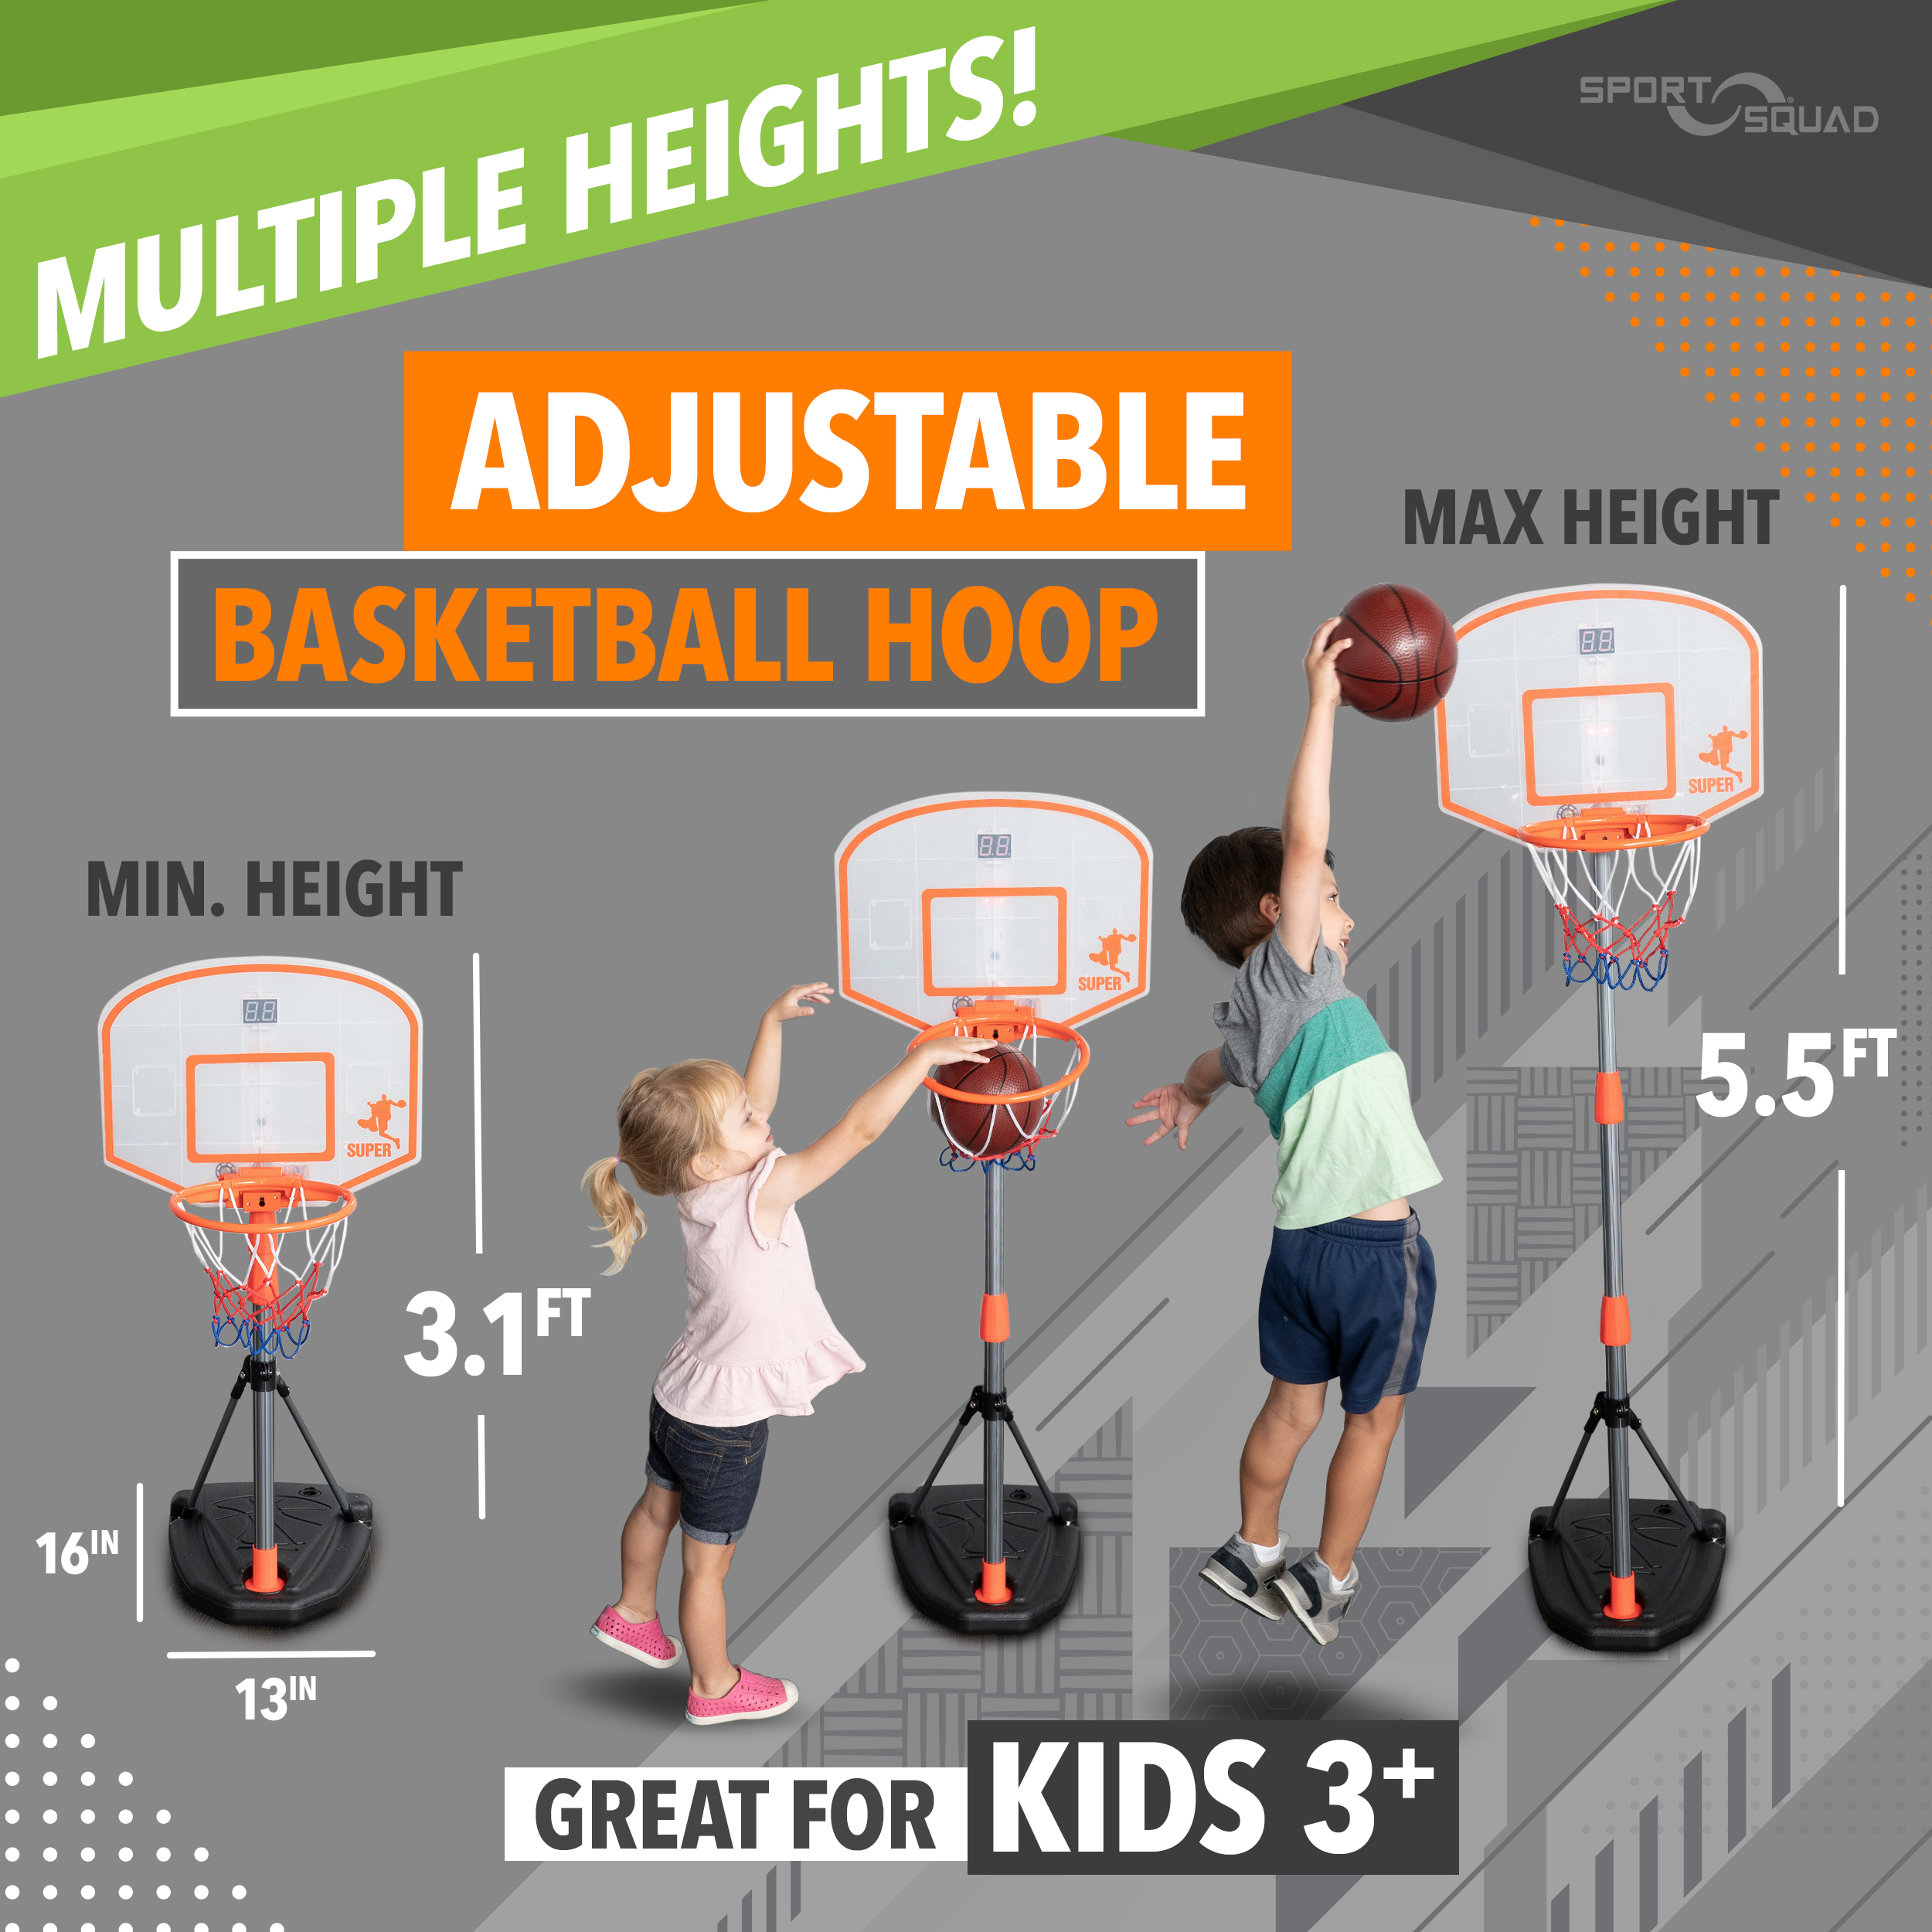 Sport Squad Jumpshot Mini Electronic Arcade Basketball Game with Light Up Basketball, 5.5' Basketball Hoop, 1ct Basketball, 1ct Air Pump - image 2 of 6